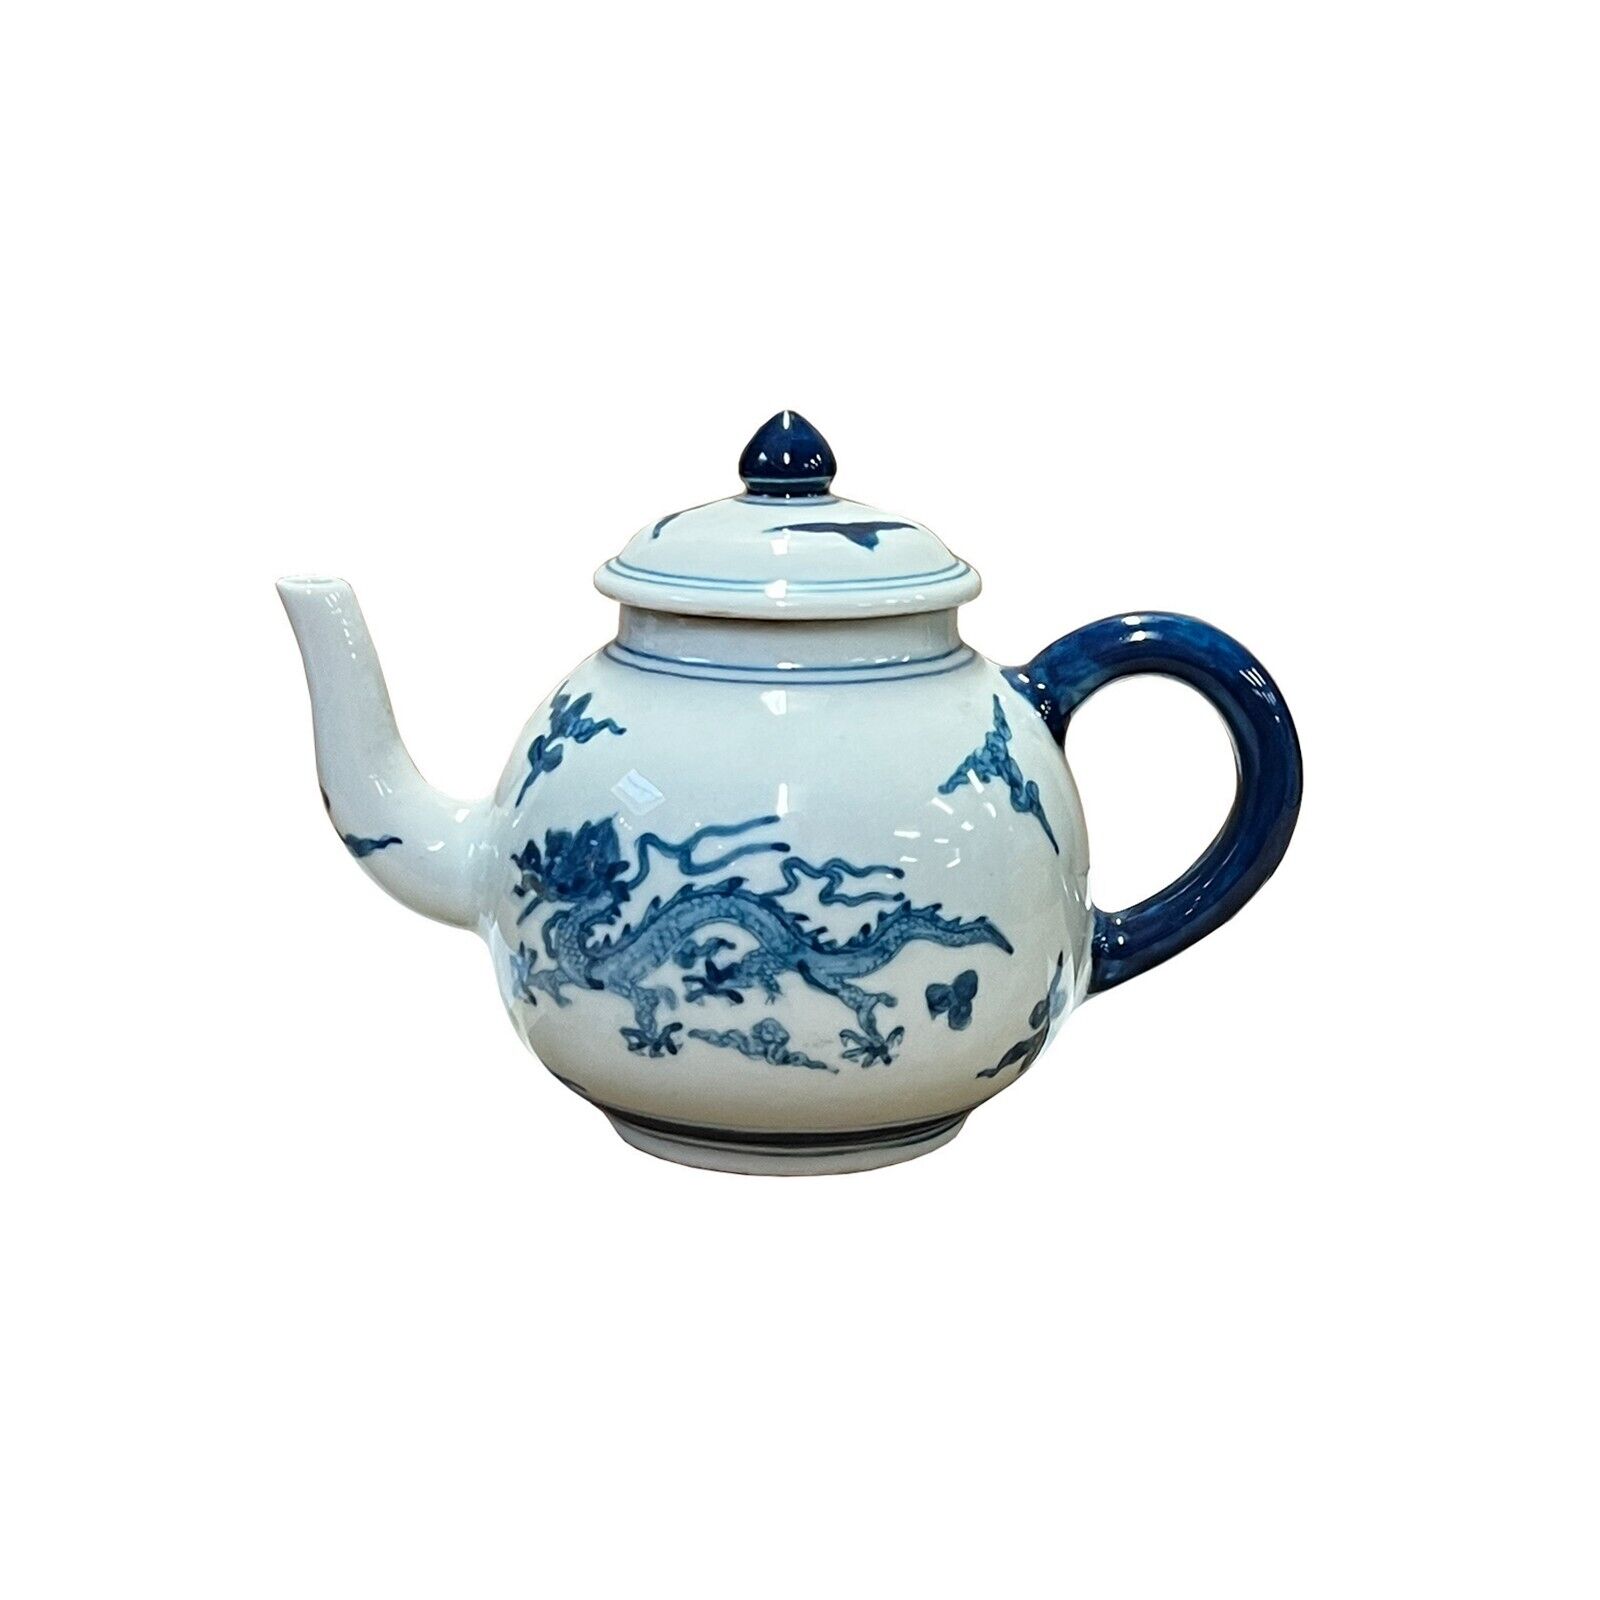 Small Chinese Blue White Porcelain Scenery Teapot Display Art ws2879